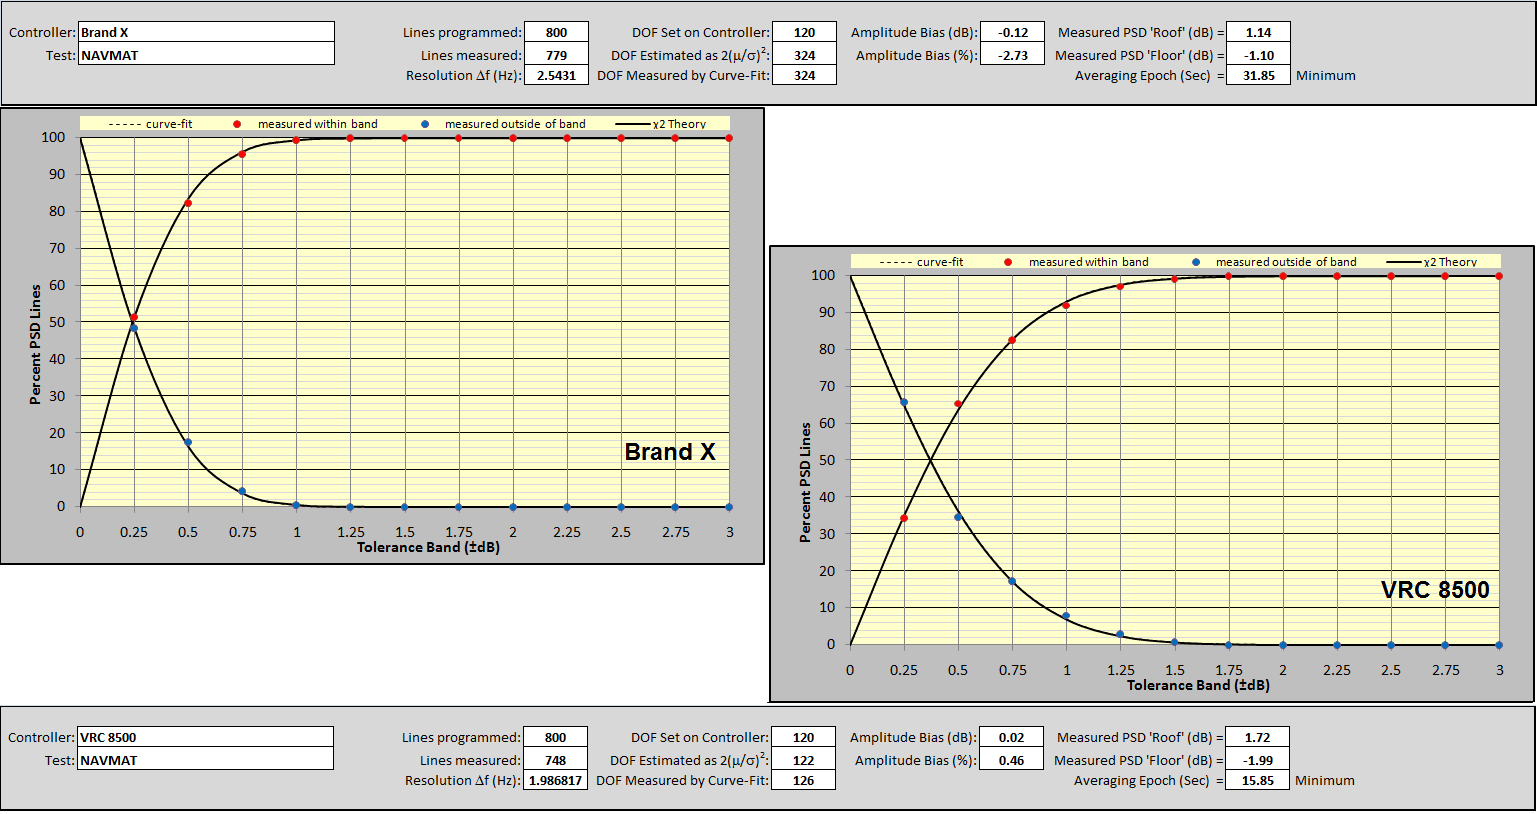 Figure 16: Comparison of Results for Brand X and VR8500 Controllers.